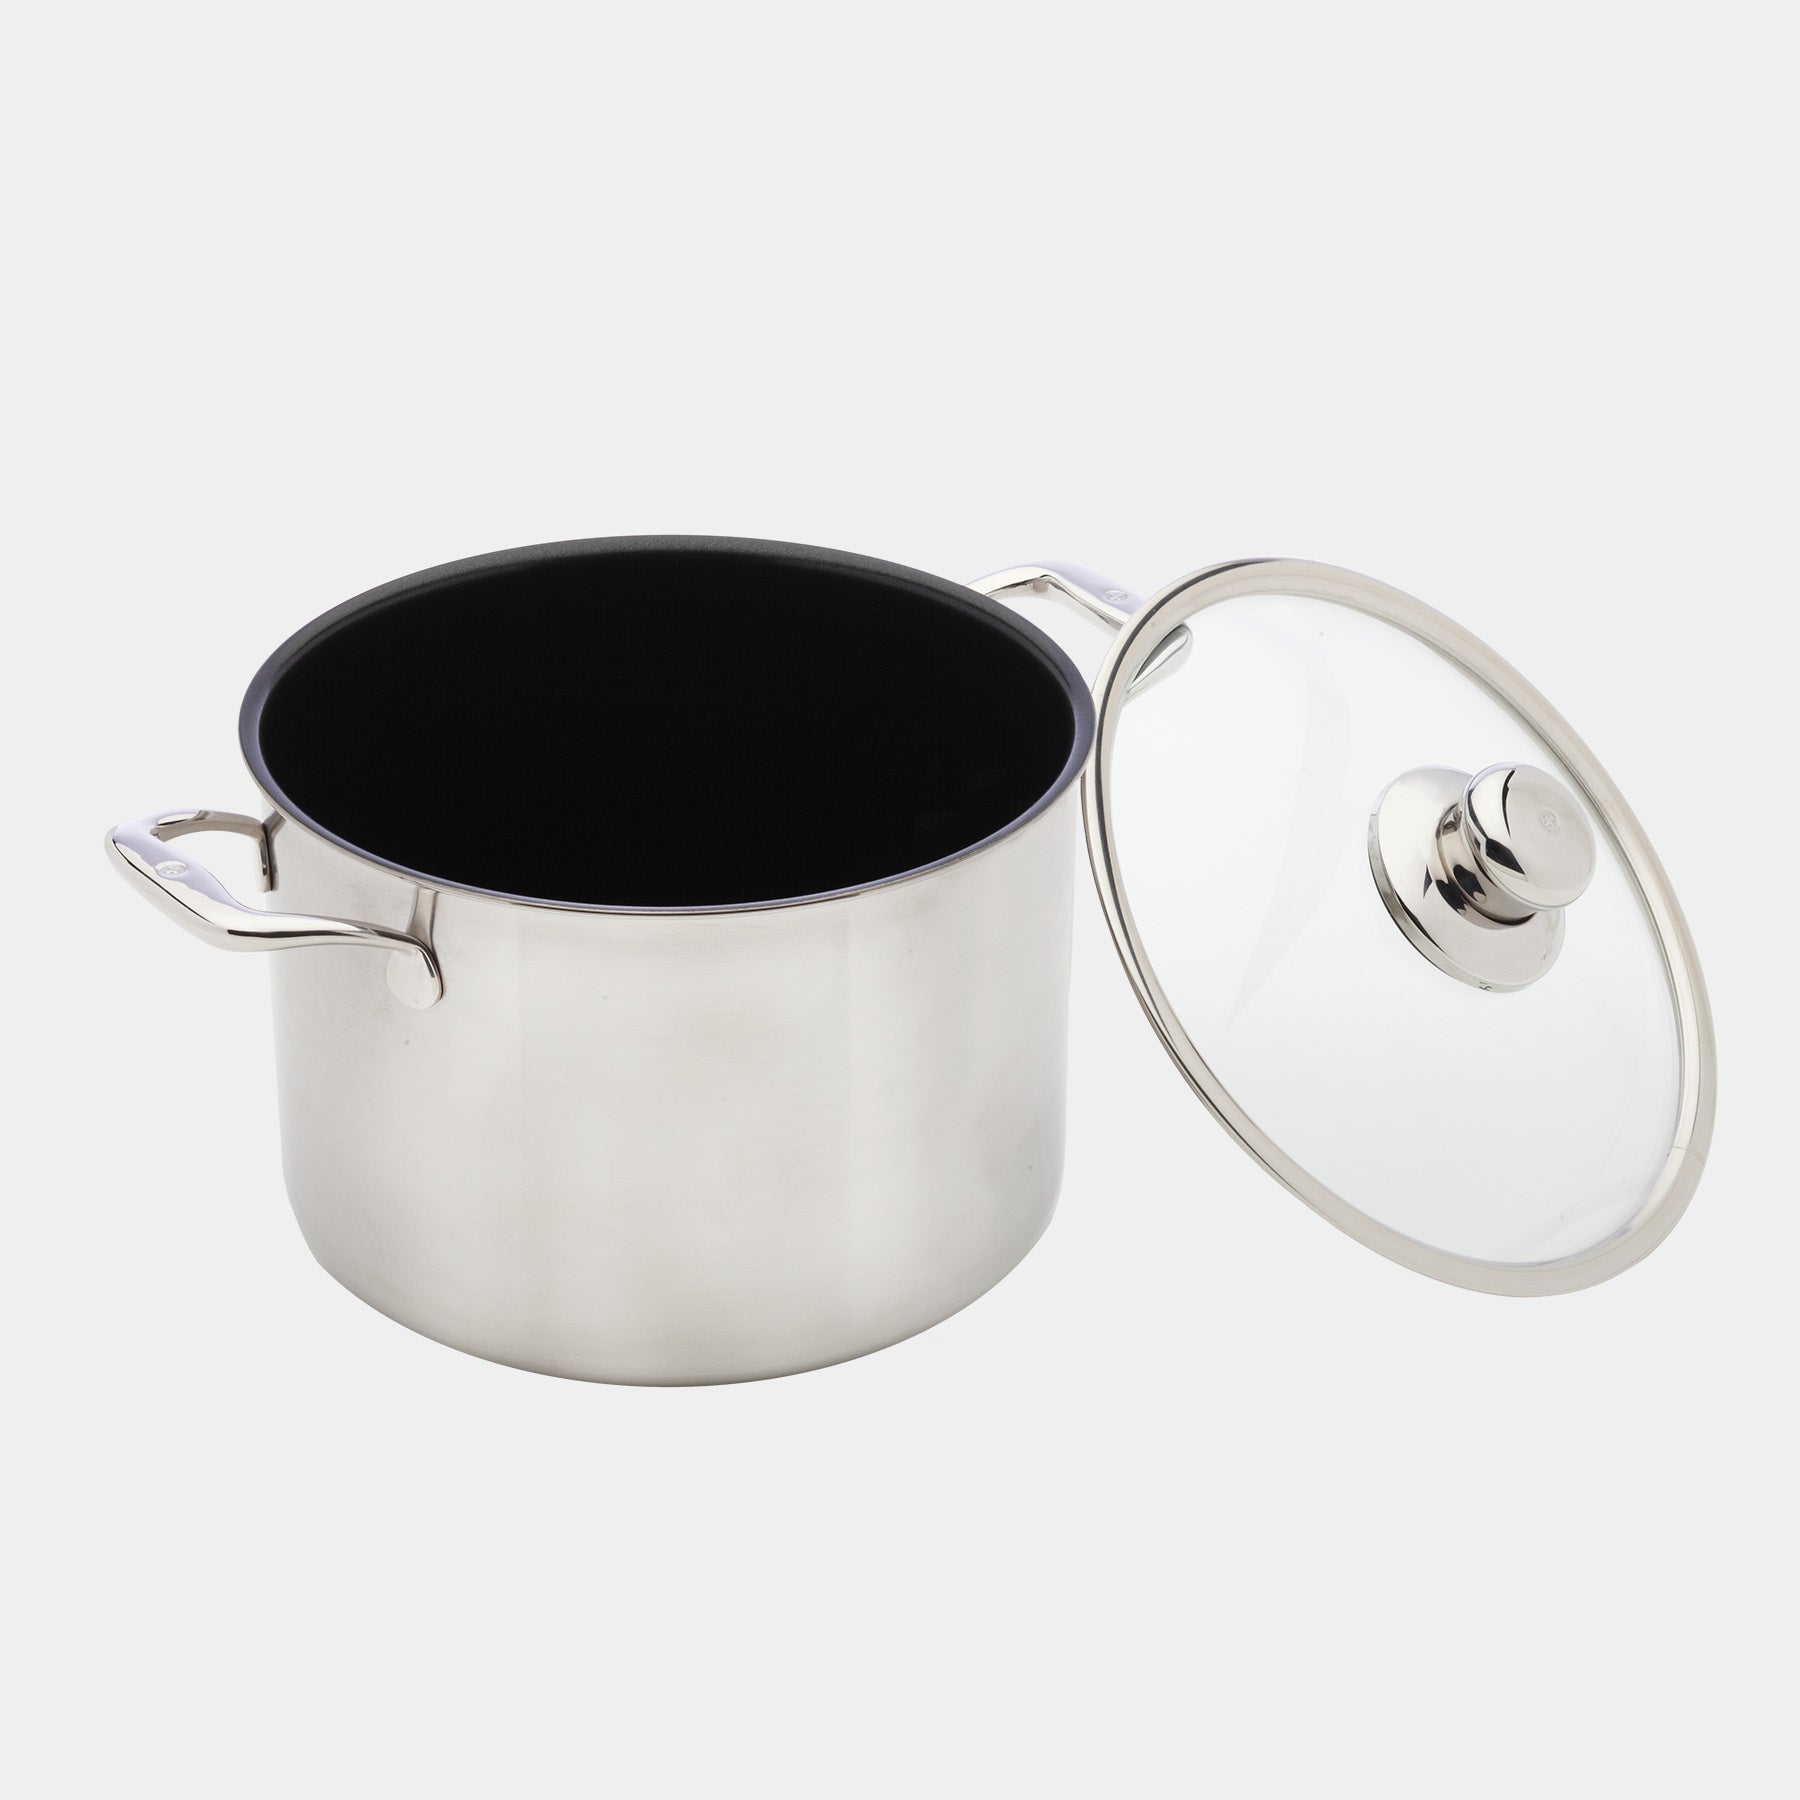 Nonstick Clad 7.9 qt Stock Pot with Glass Lid - Induction